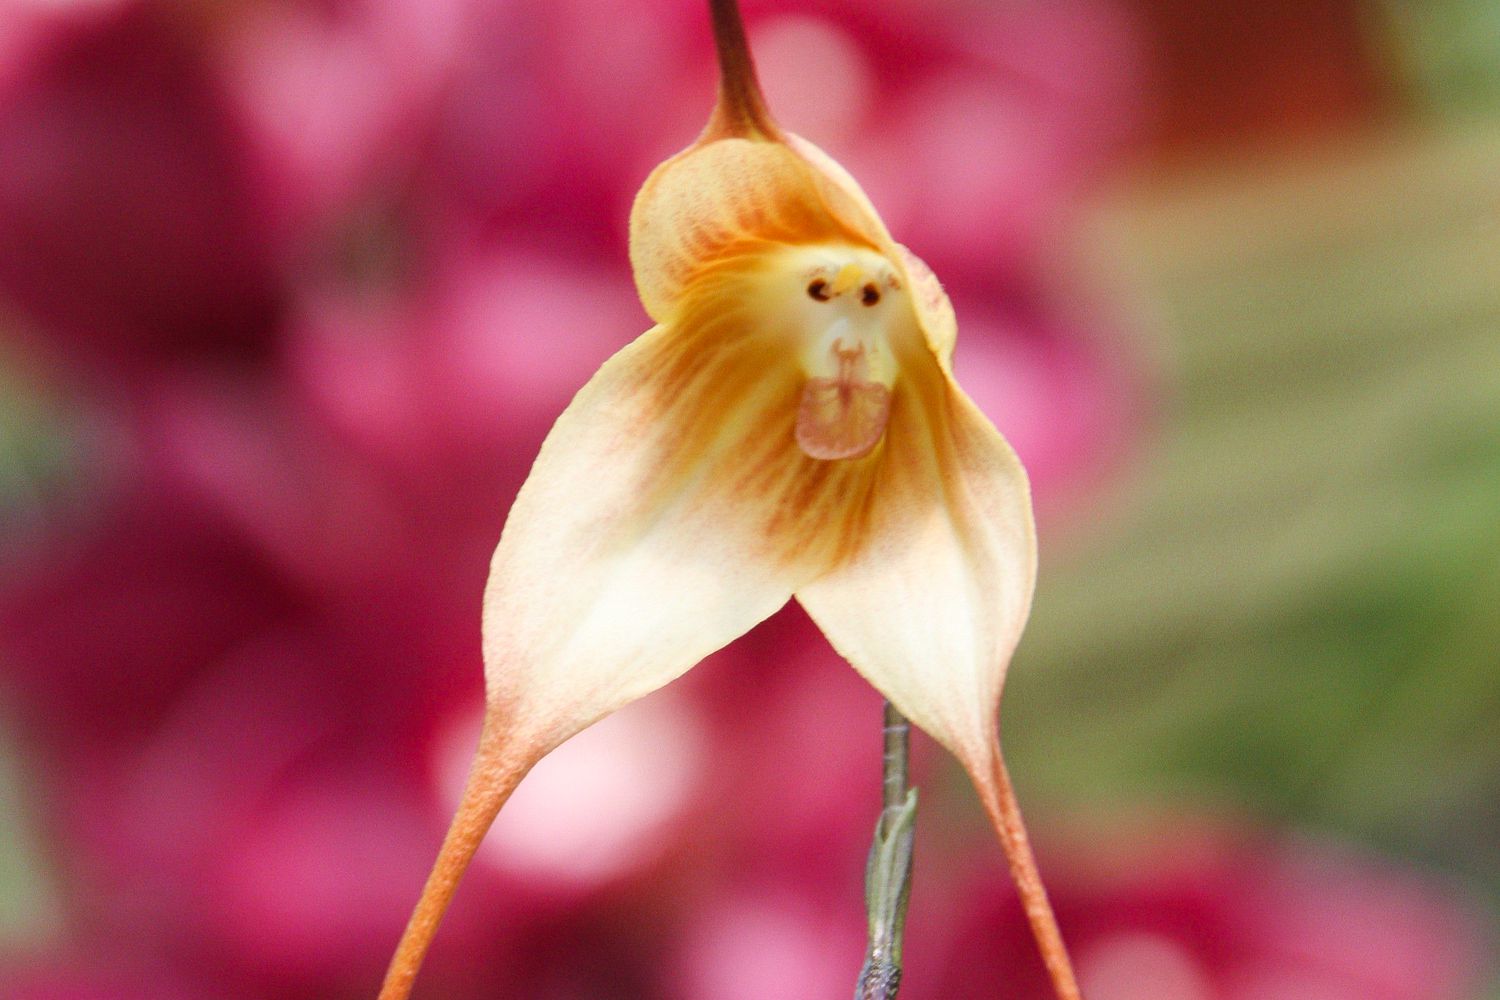 9 Extraordinary Facts About Monkey Flower - Facts.net